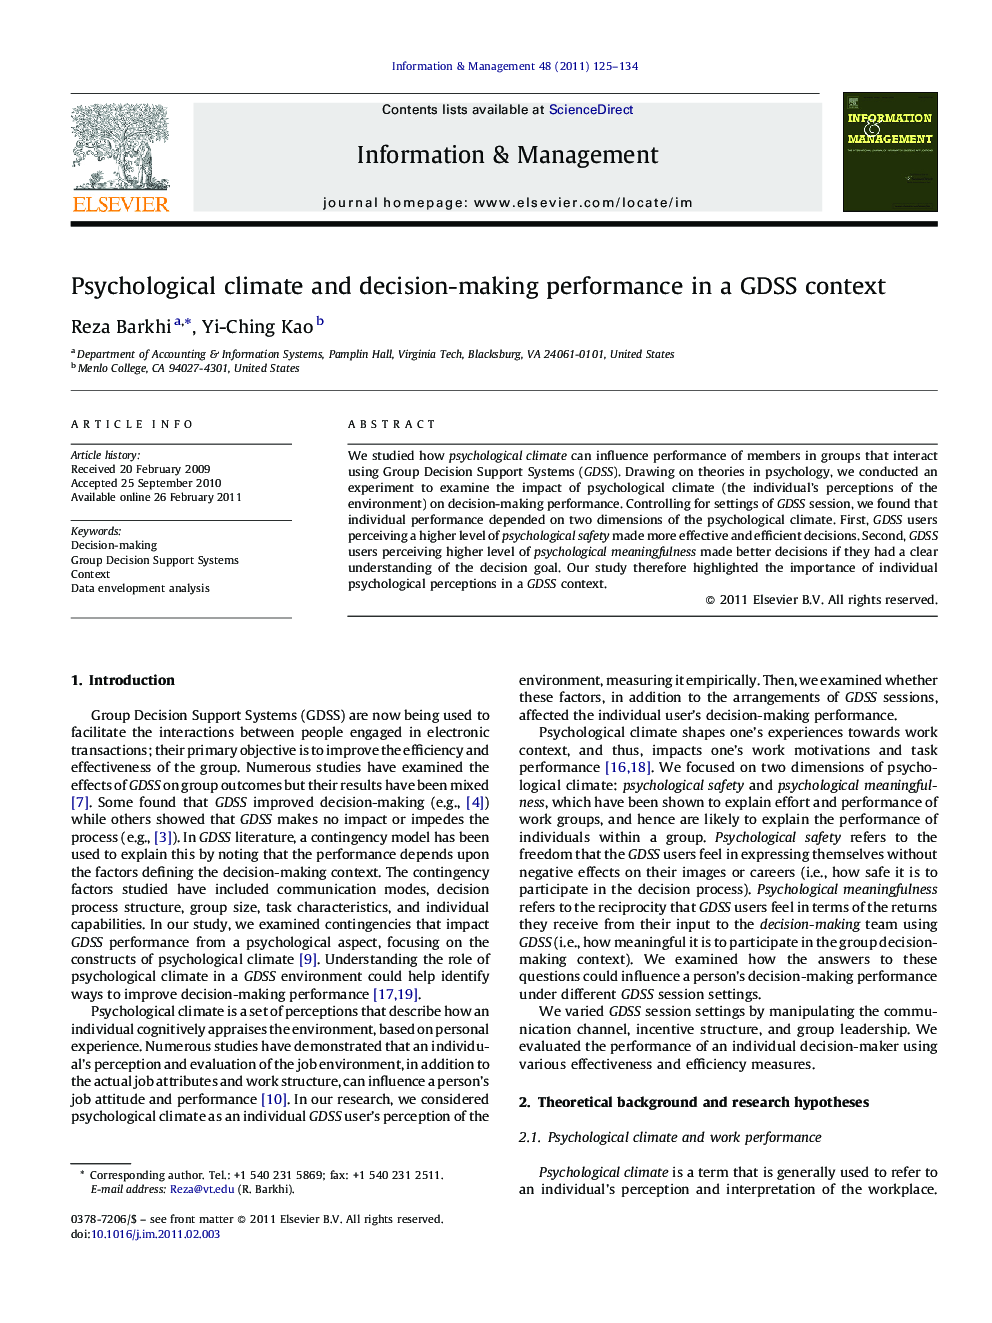 Psychological climate and decision-making performance in a GDSS context